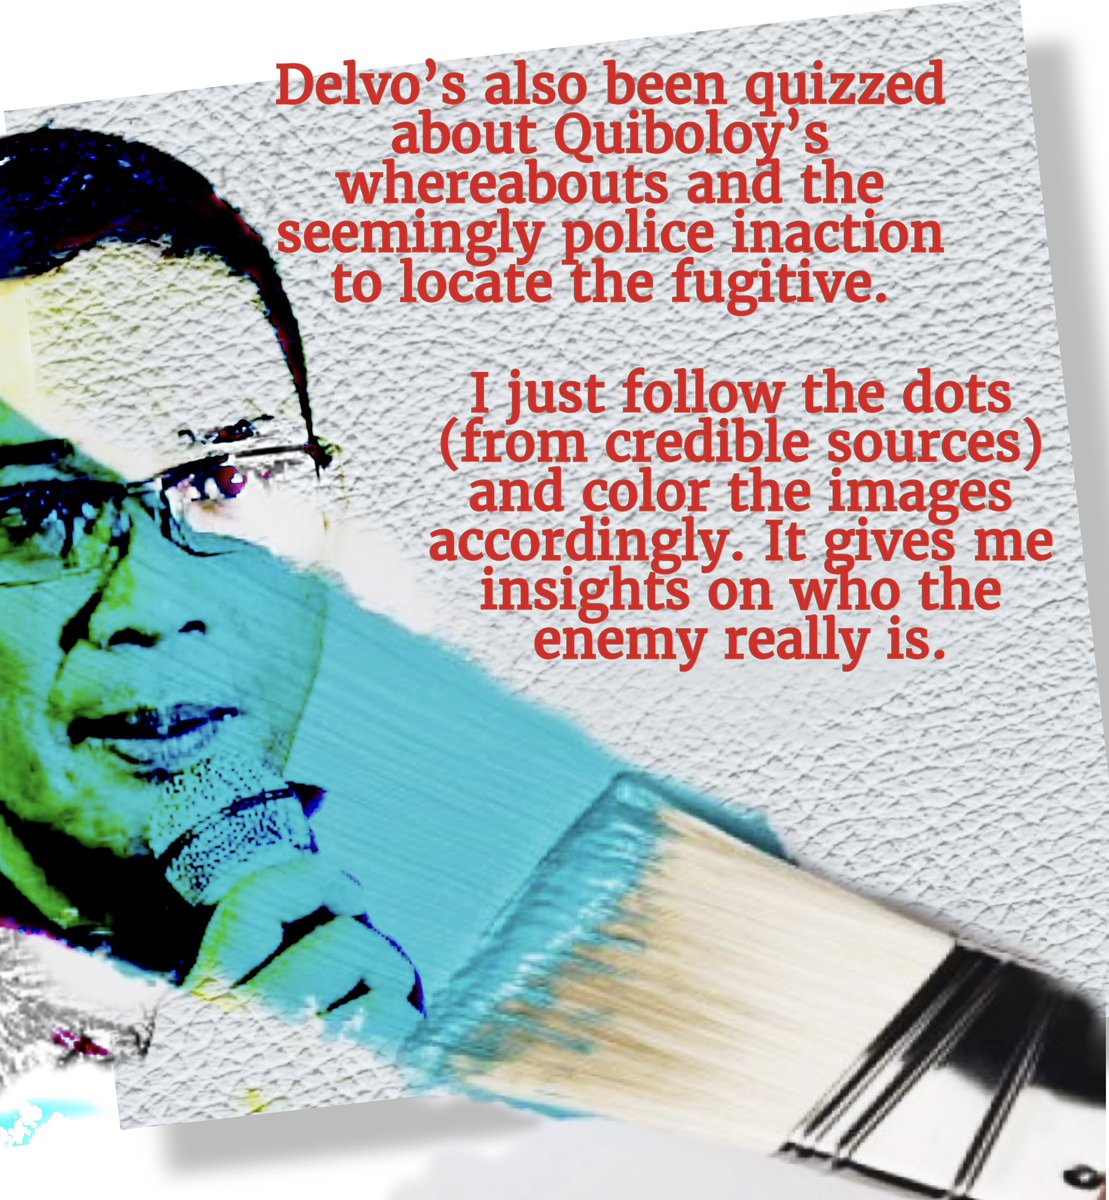 ‘Former Davao region police chief Alden Delvo’s name is mentioned 46 TIMES in the affidavit submitted by former cop and self-confessed Davao Death Squad hitman Arturo Lascañas to the ICC’
~ Jodesz Gavilan via Rappler